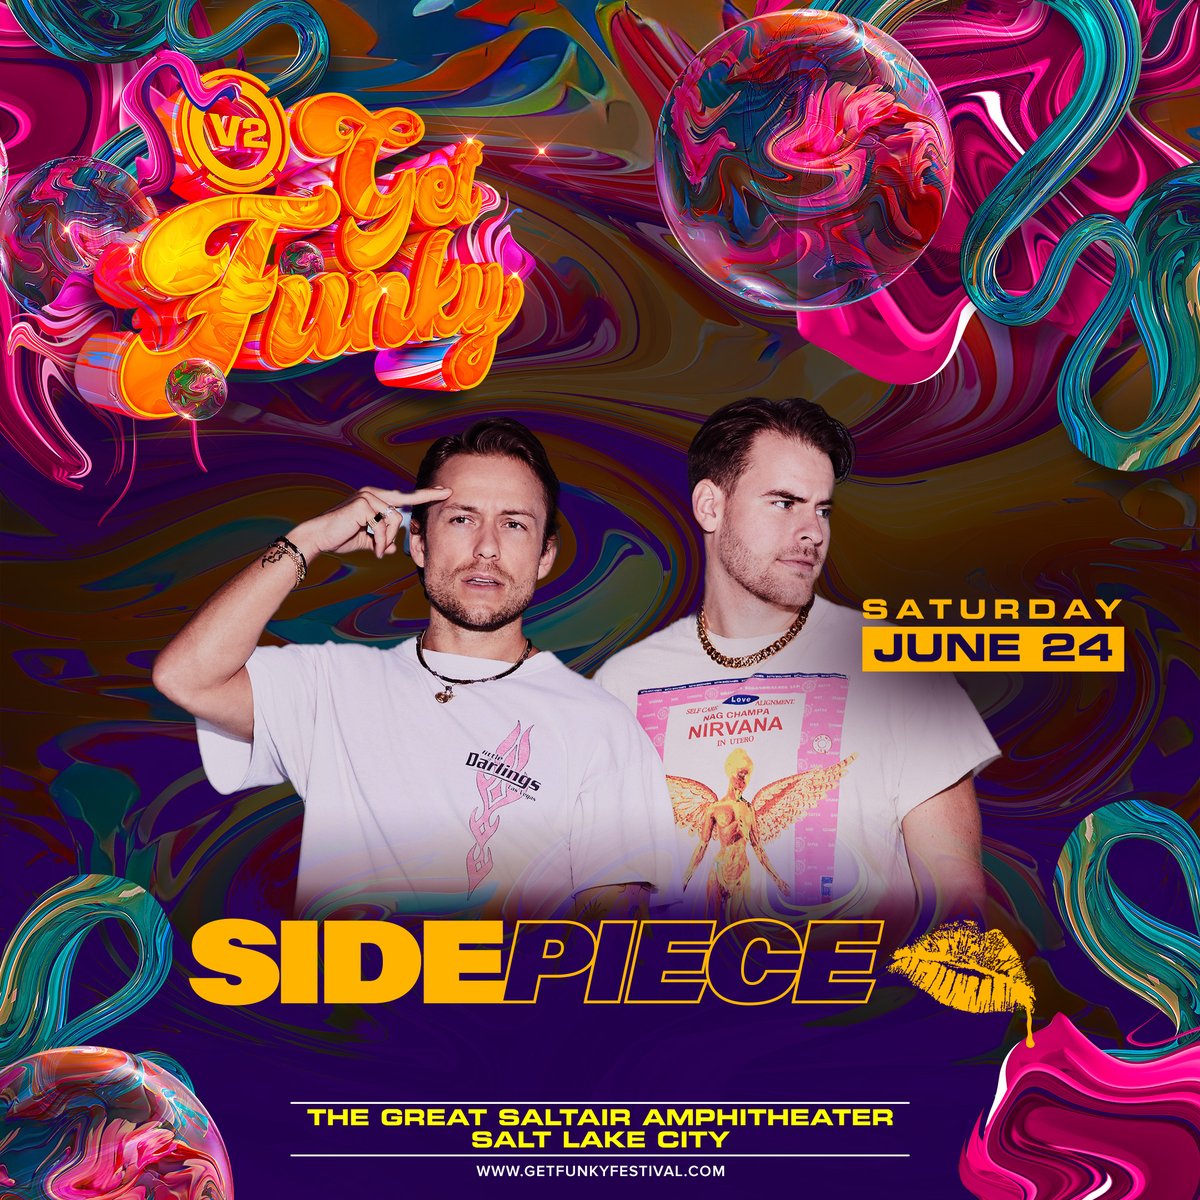 Get ready for @youasidepiece to bring their sliding genres to Get Funky Festival! The brainchild of @partyfavor and @DJNittiGritti SIDEPIECE is one of the most sought-after house acts in the industry!🕺🏻🪩🕺🏻